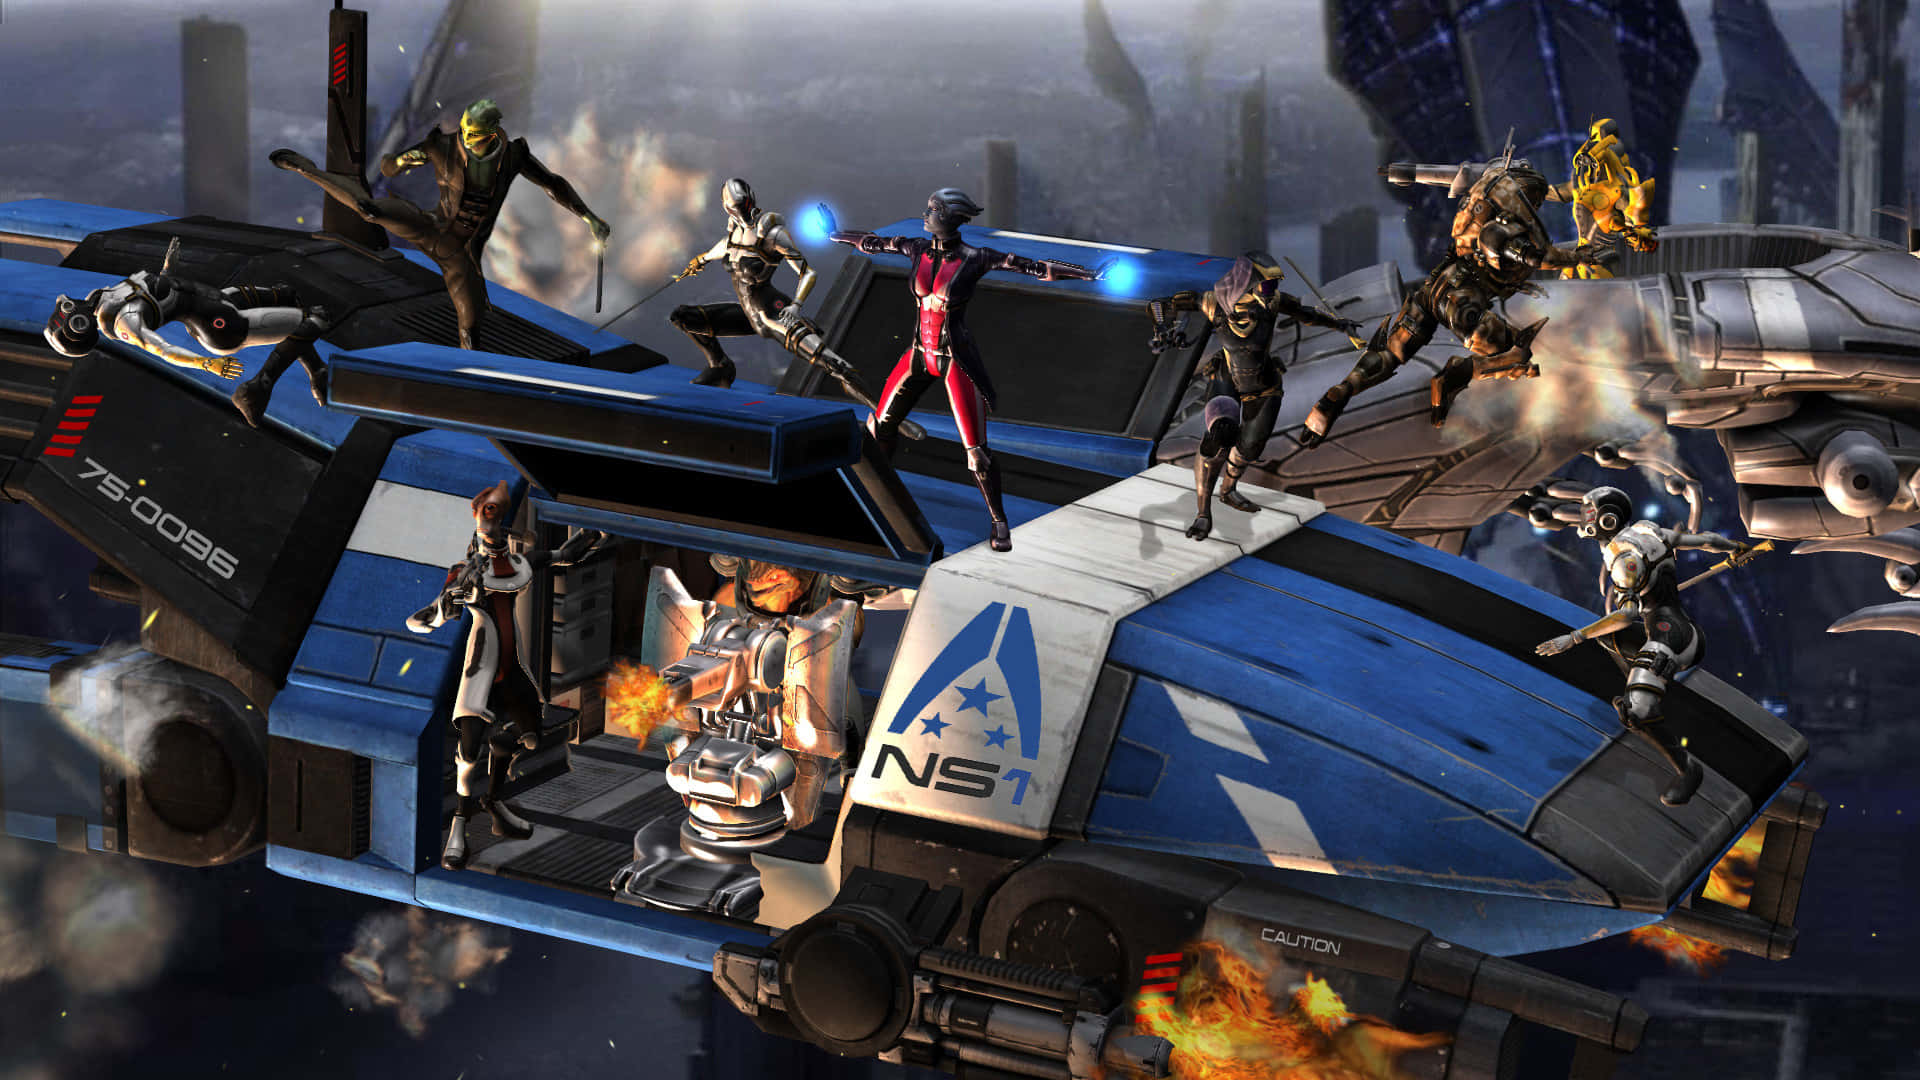 Intense Battle in the Mass Effect Universe with Cerberus Forces Wallpaper